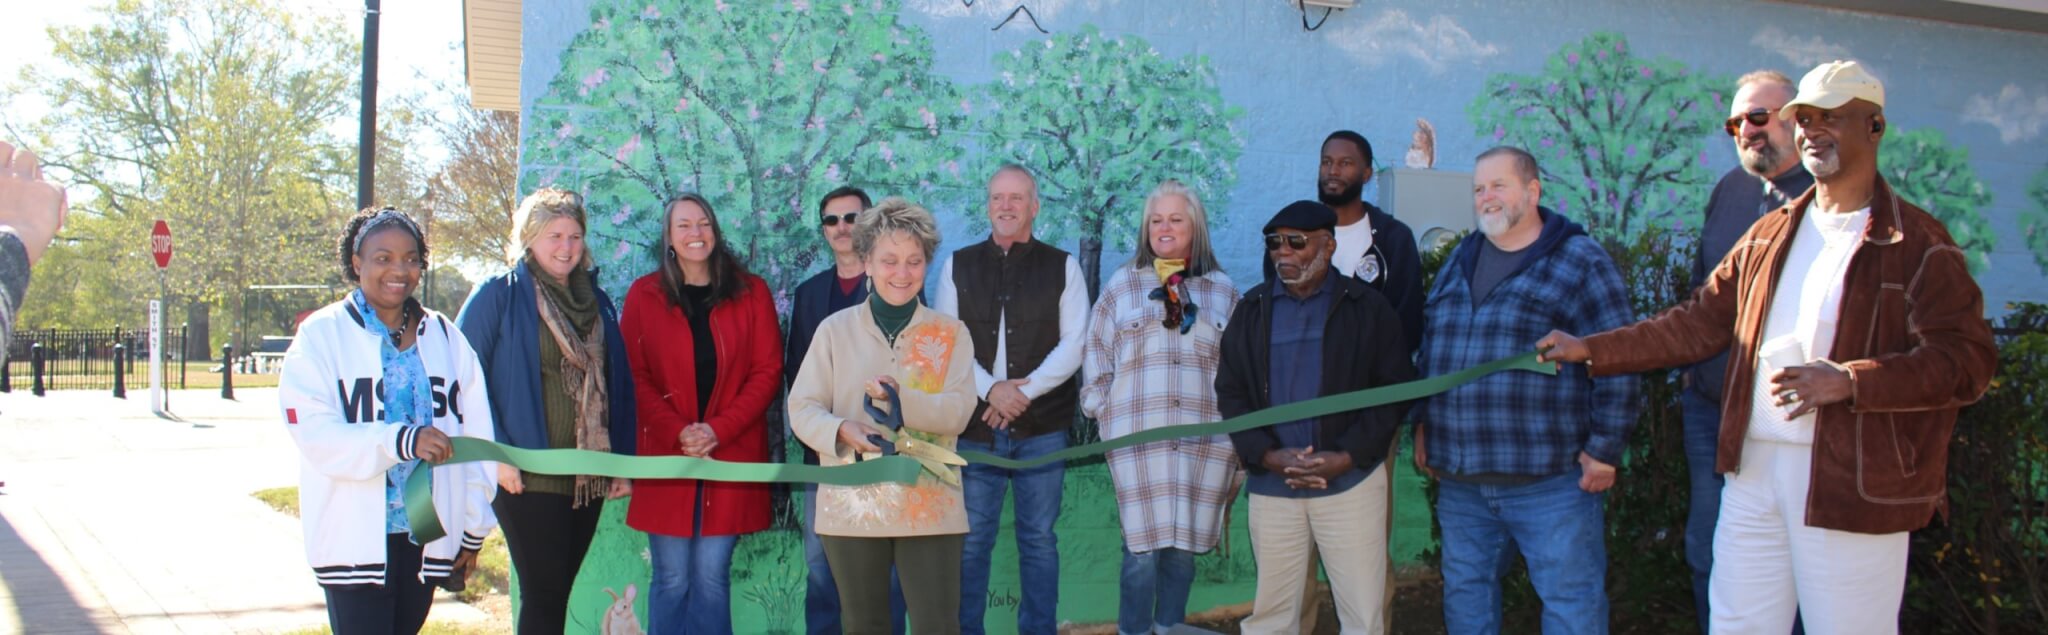 Group Ribbon Cutting in front of mural